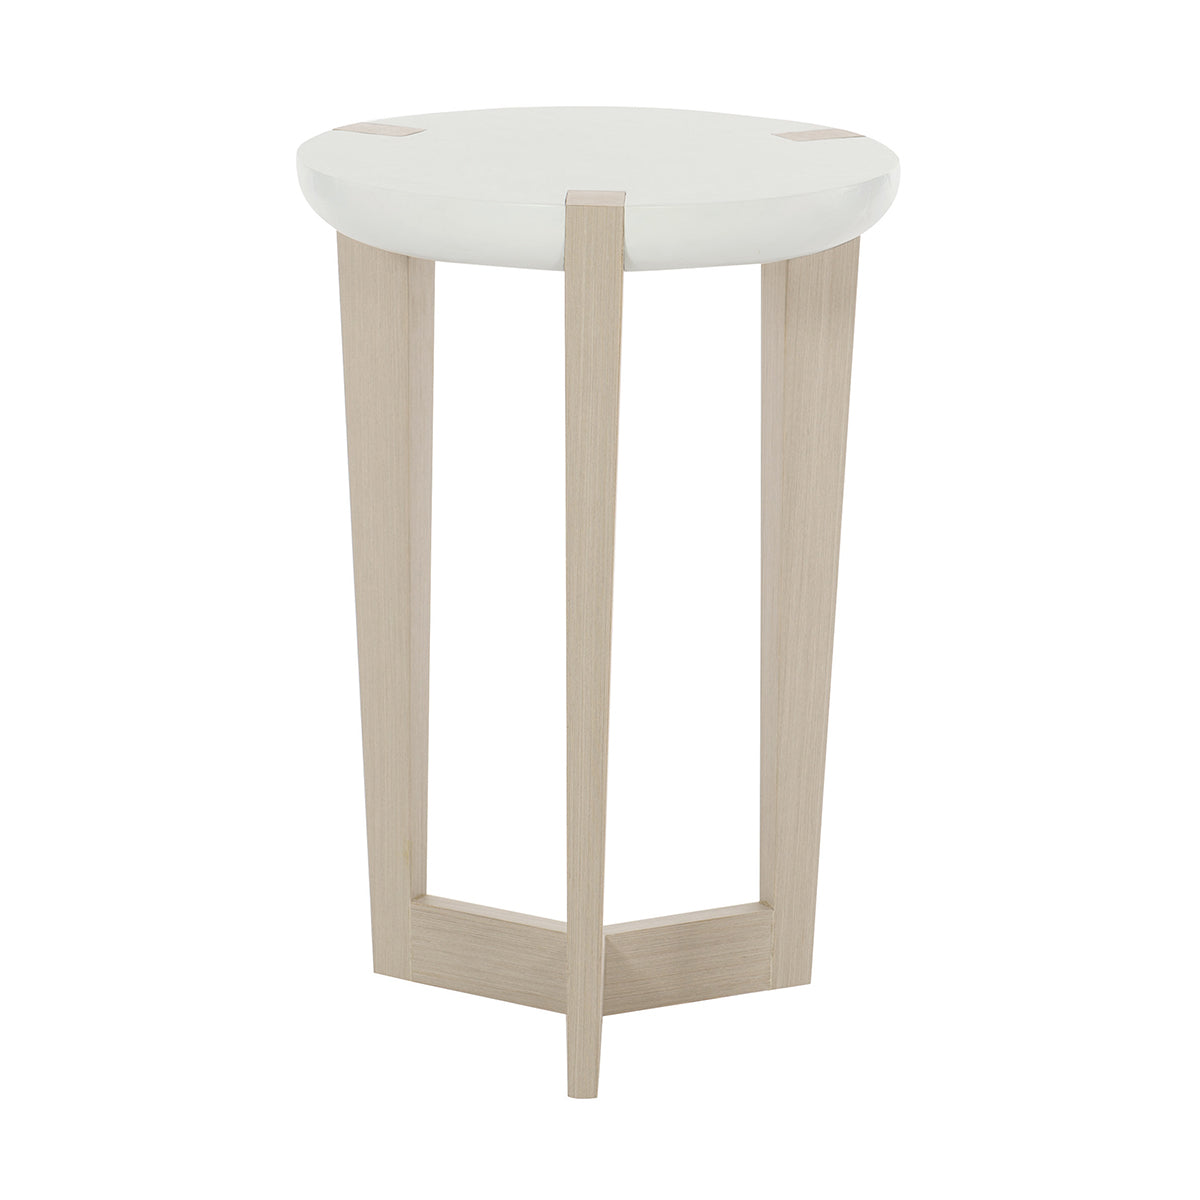 AXIOM  ROUND CHAIR SIDE TABLE